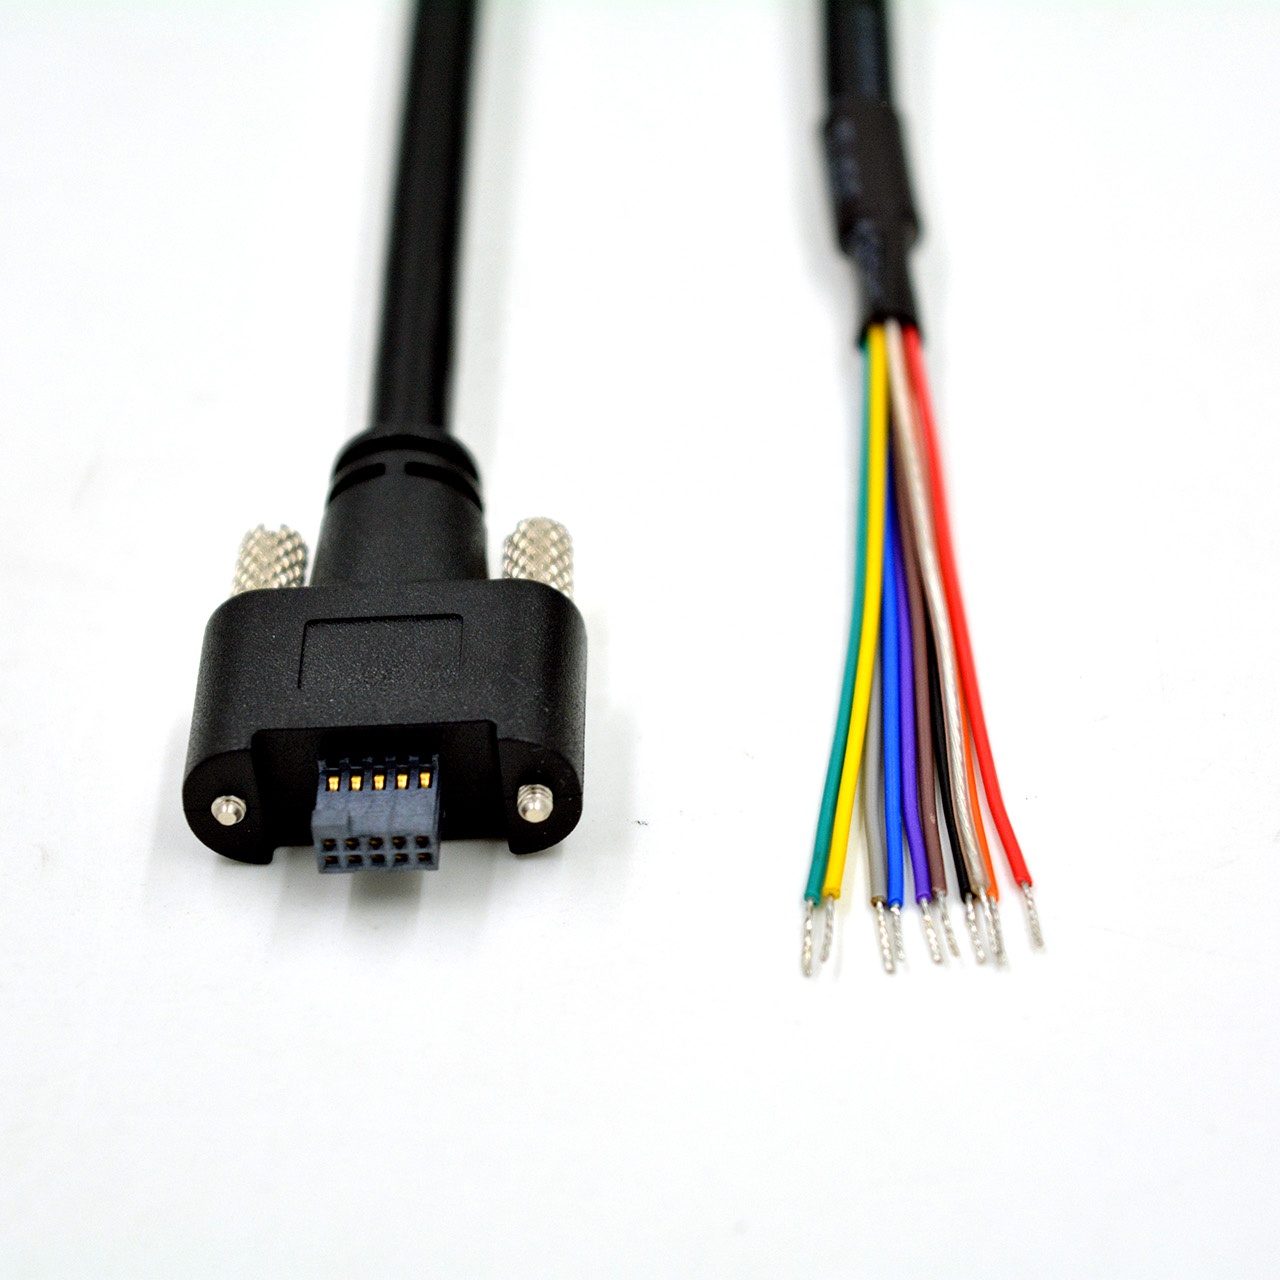 Dalsa Genie Nano flying lead I/O cable with locking screws for industrial cameras